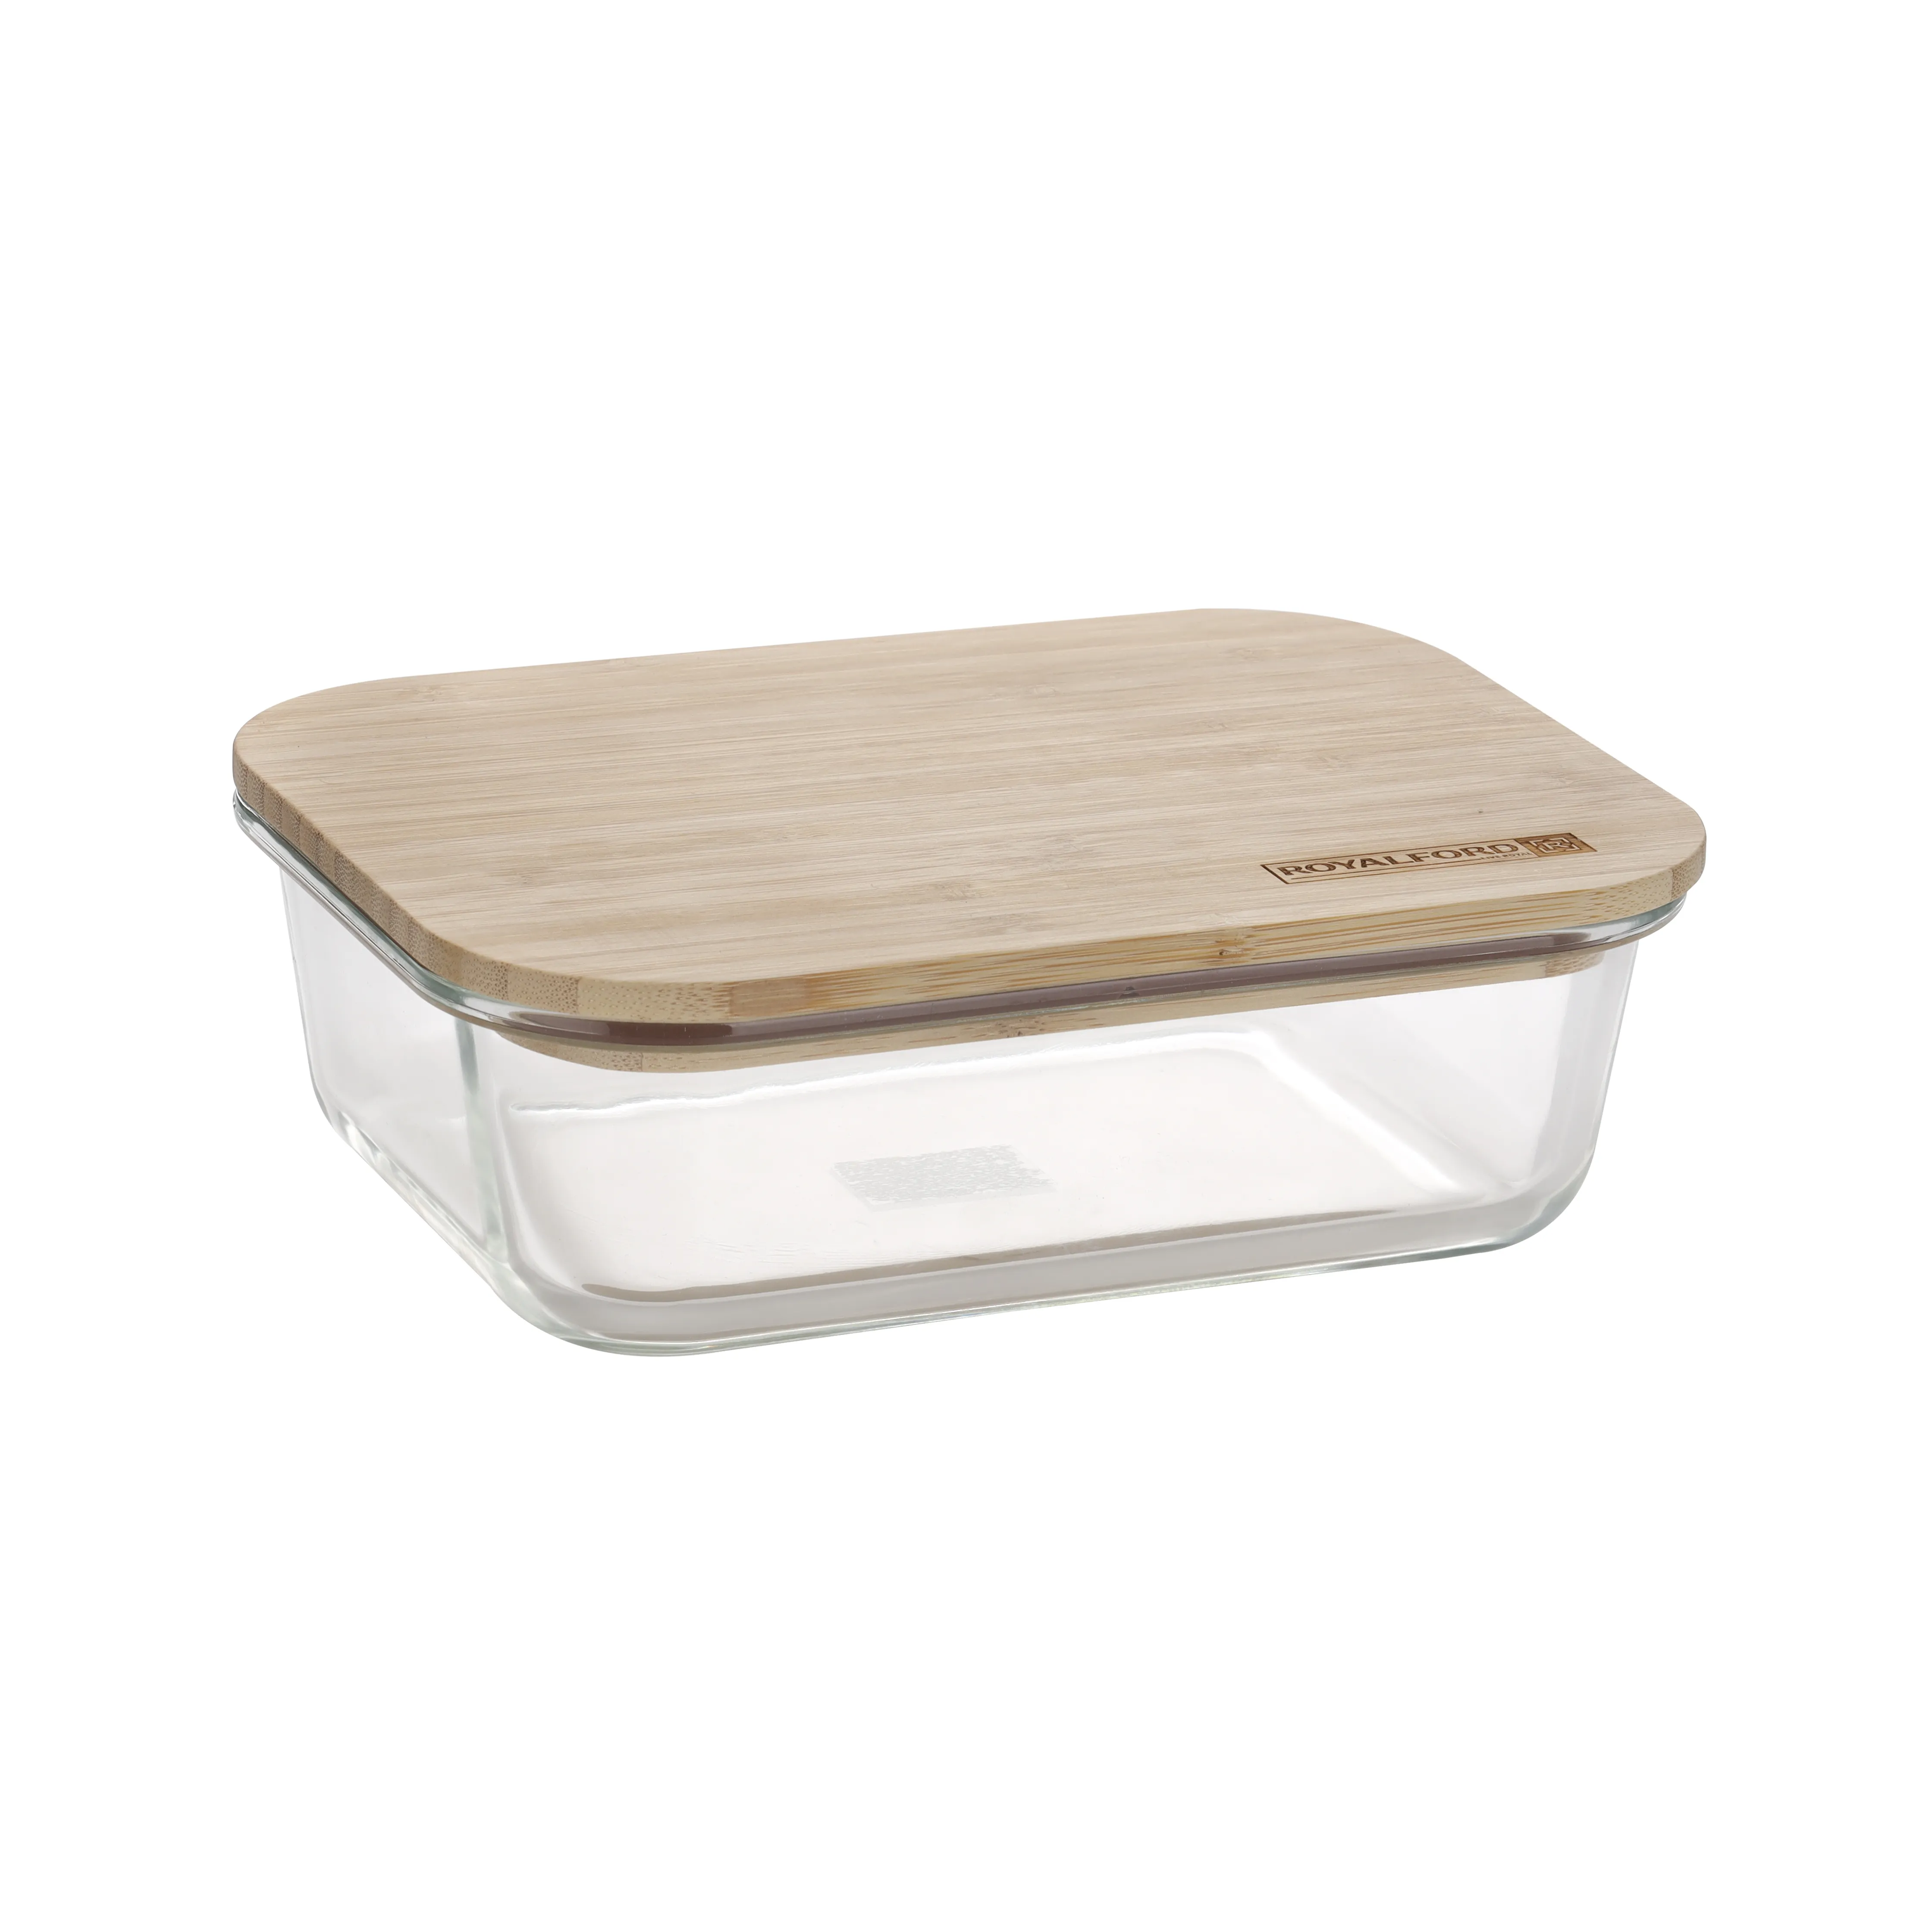 Royalford Rectangular Glass Food Container, 370ml Capacity, RF10318 - Freezer & Dishwasher Safe, Borosilicate Glass with Bamboo Lid, Air Tight Lid with Silicone Sealing Ring